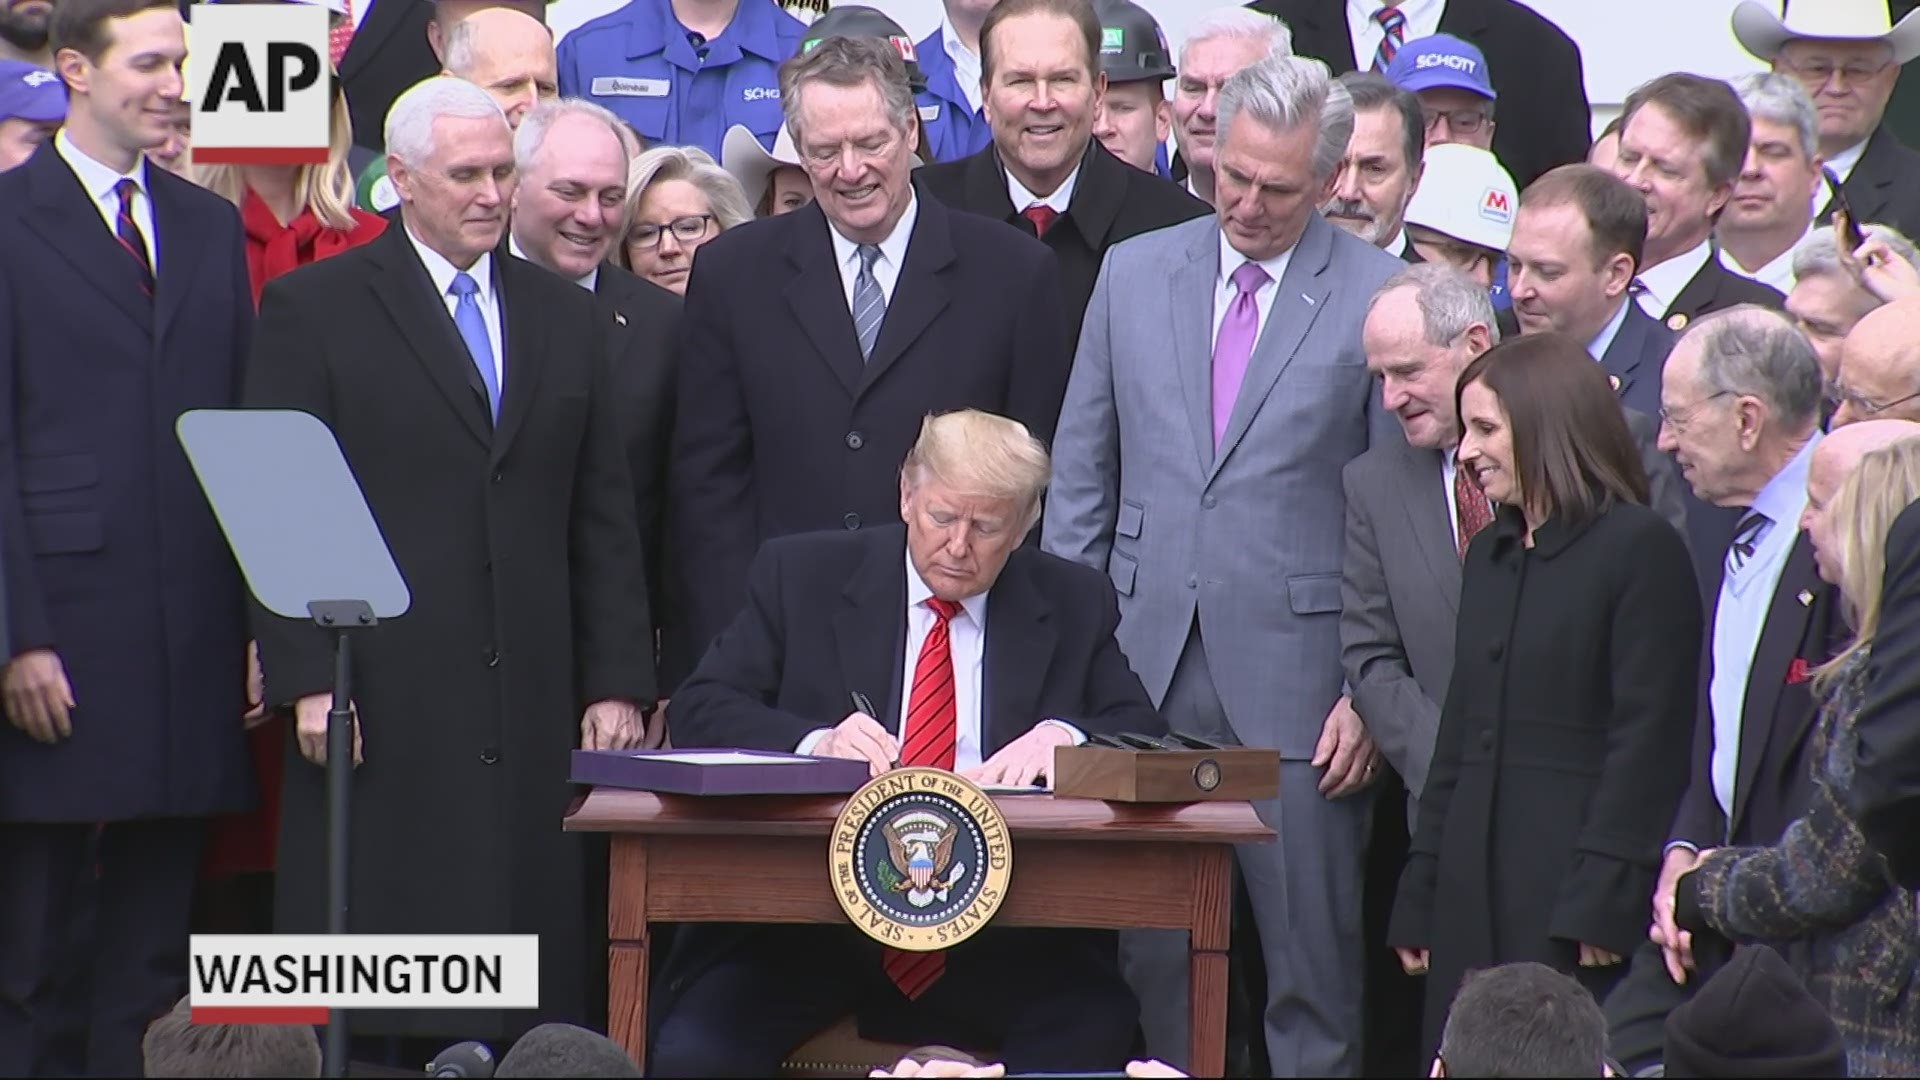 President Donald Trump has signed into law the USMCA trade deal, a major rewrite of the rules of trade with Canada and Mexico.